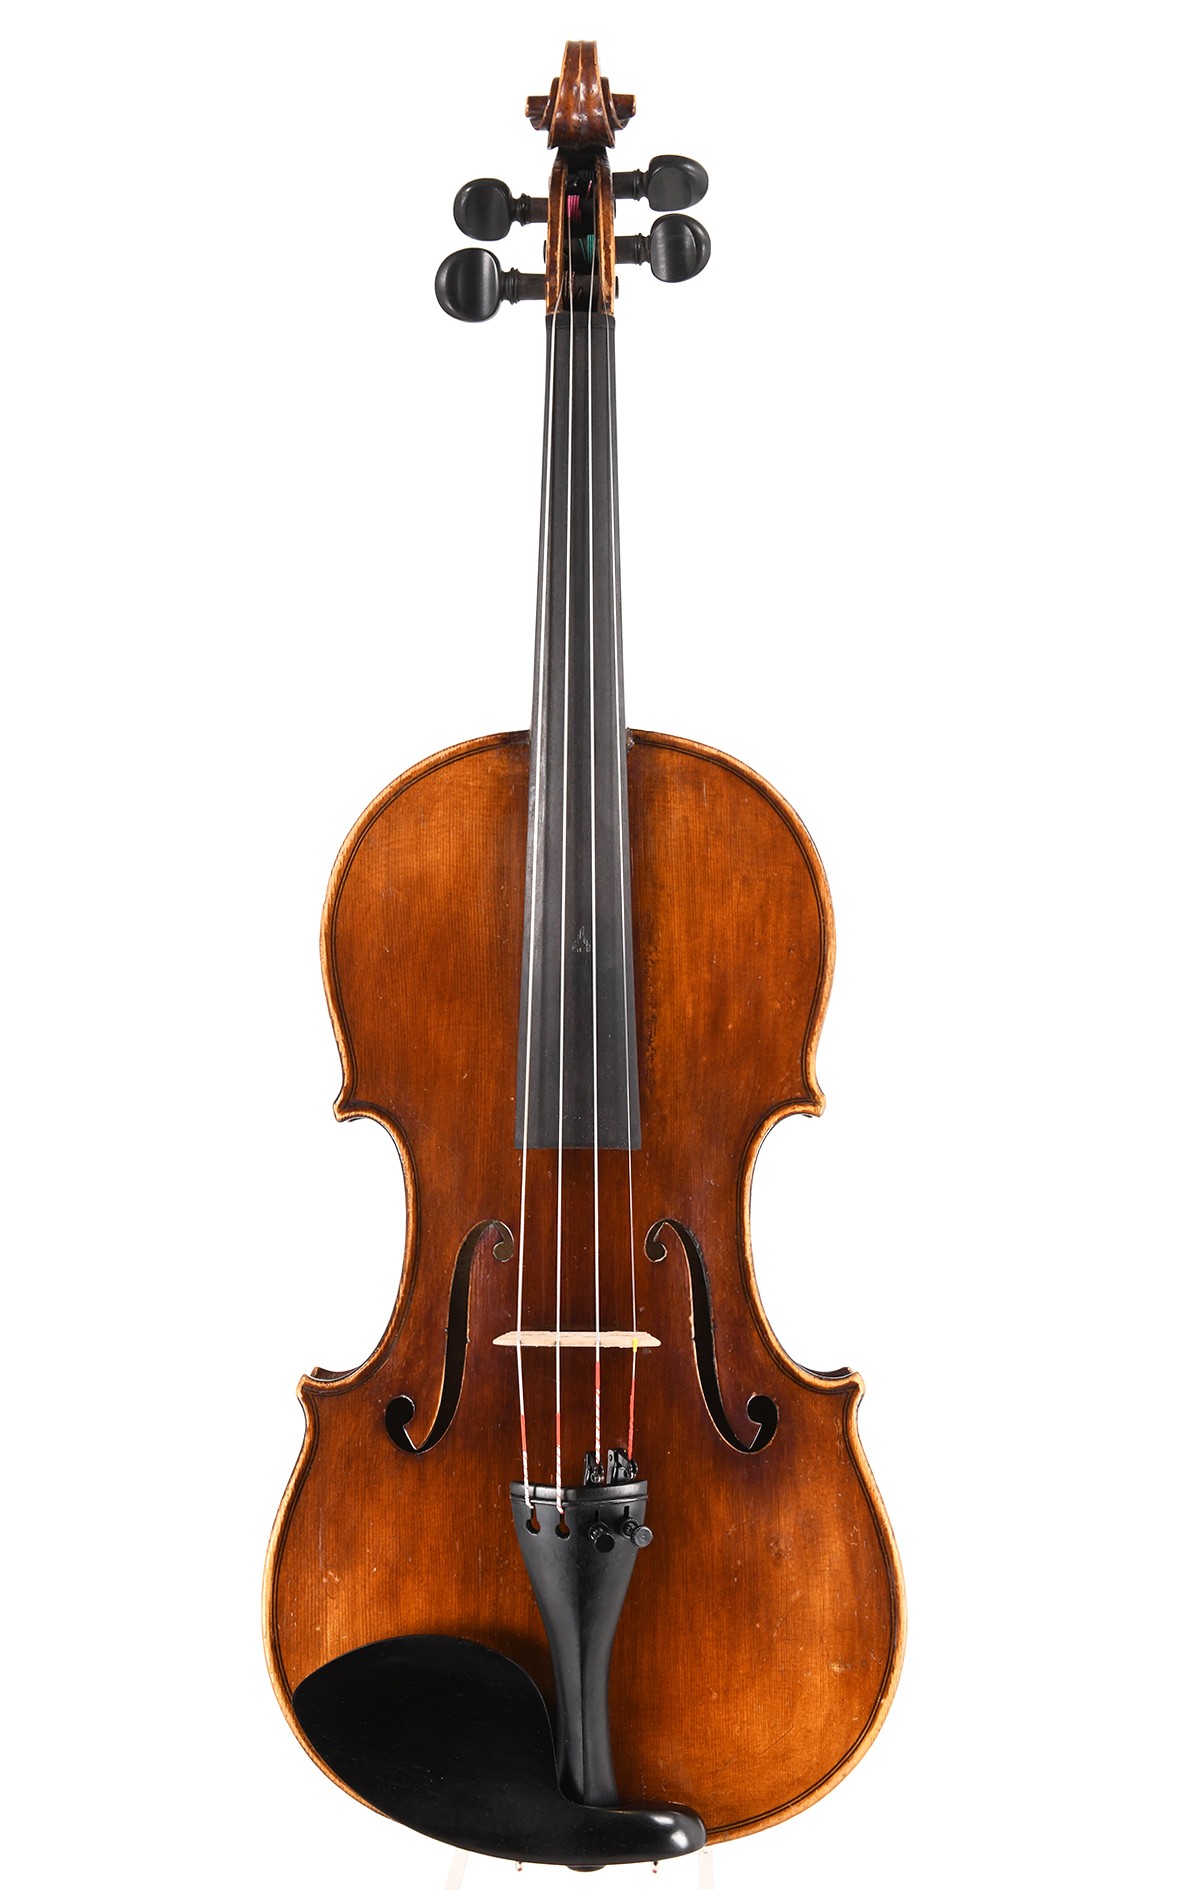 J. A. Baader violin from Mittenwald